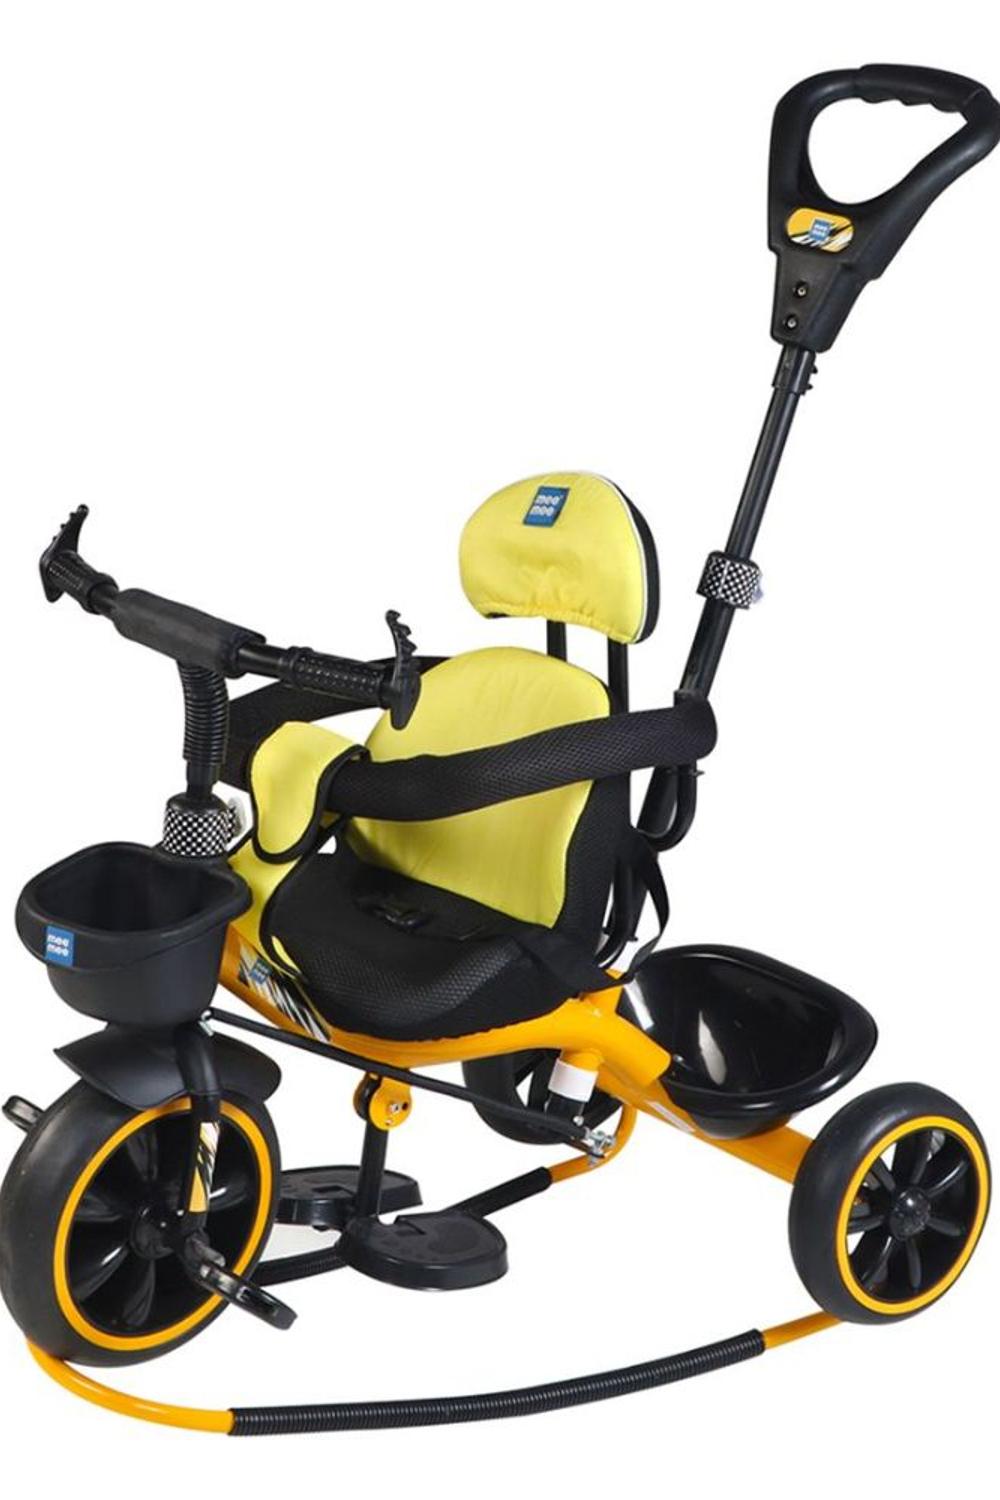 Baby Tricycle With Rocking Feature, Adjustable Cushioned Seat & Footrest (Yellow)